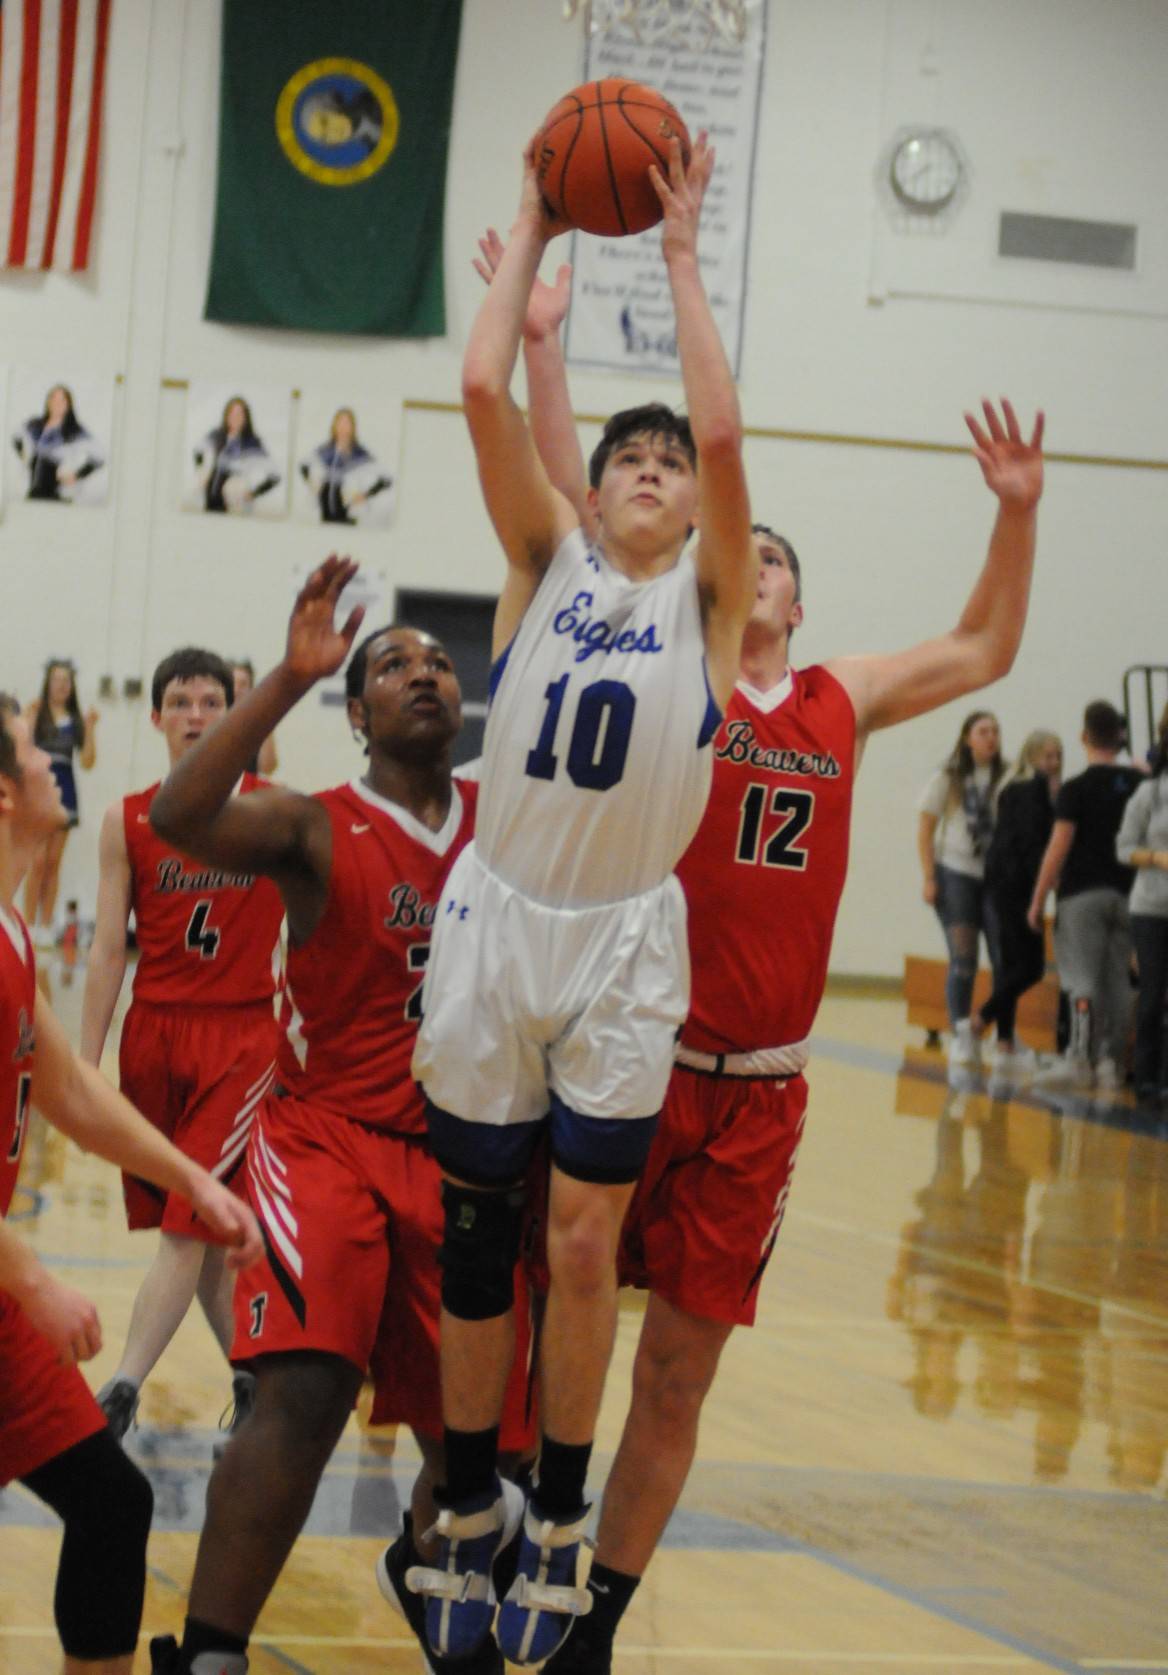 Elma’s Cobey Moore (10) is fouled by Tenino’s Paxton Russell (12) in the first half of the Eagles’ 65-48 win on Thursday at Elma High School. (Ryan Sparks | Grays Harbor News Group)